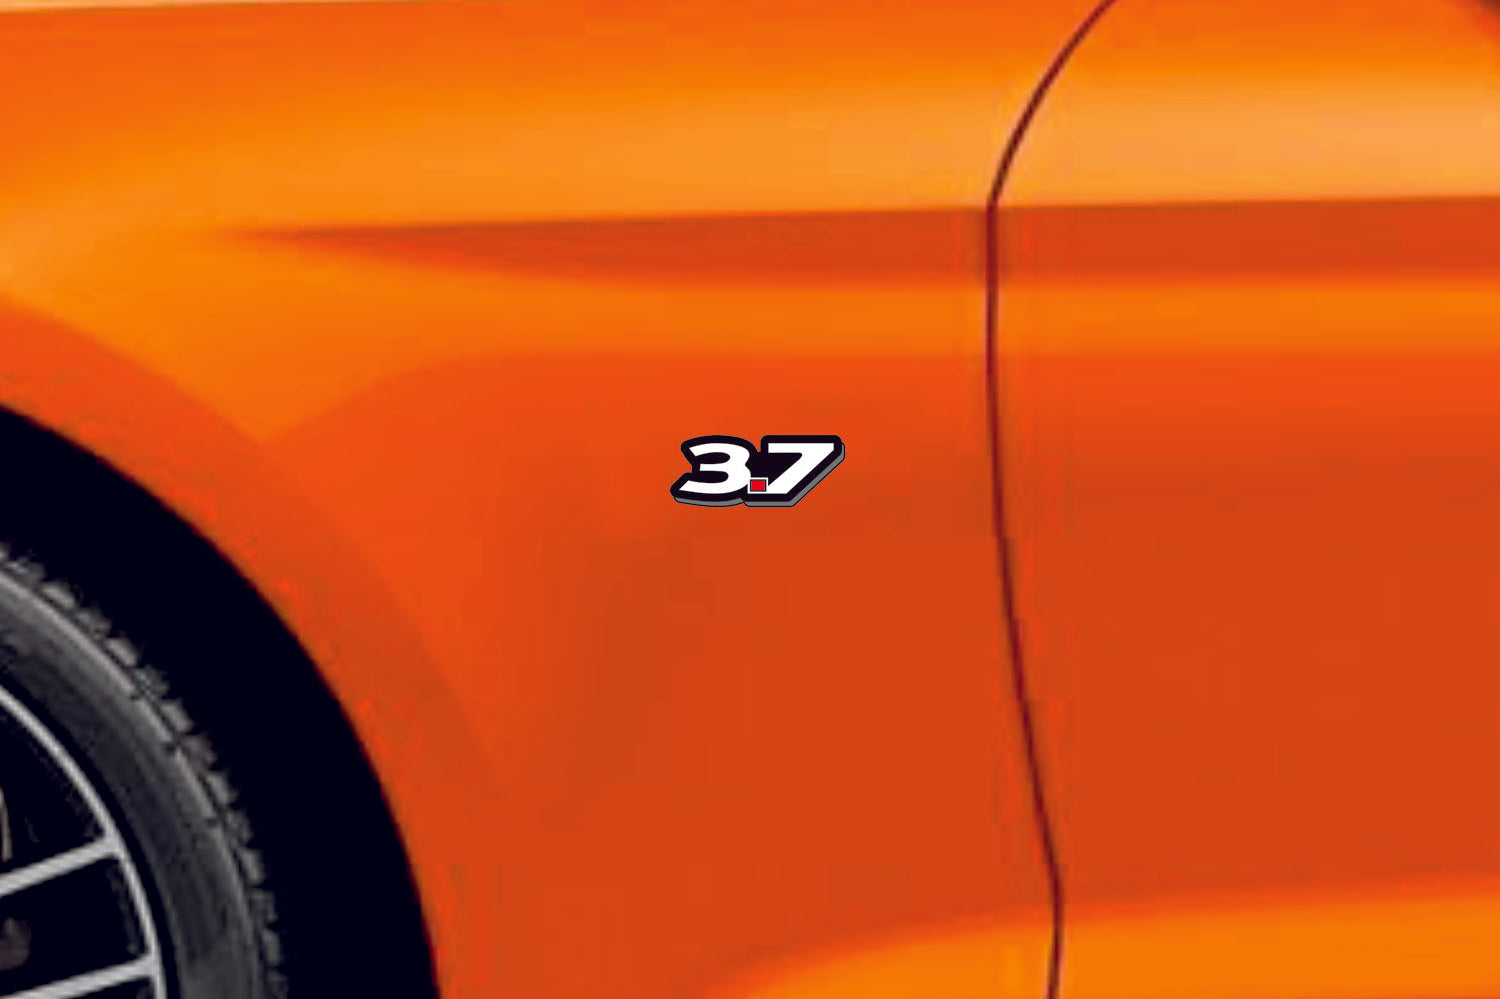 Ford Mustang emblem for fenders with 3.7 logo - decoinfabric